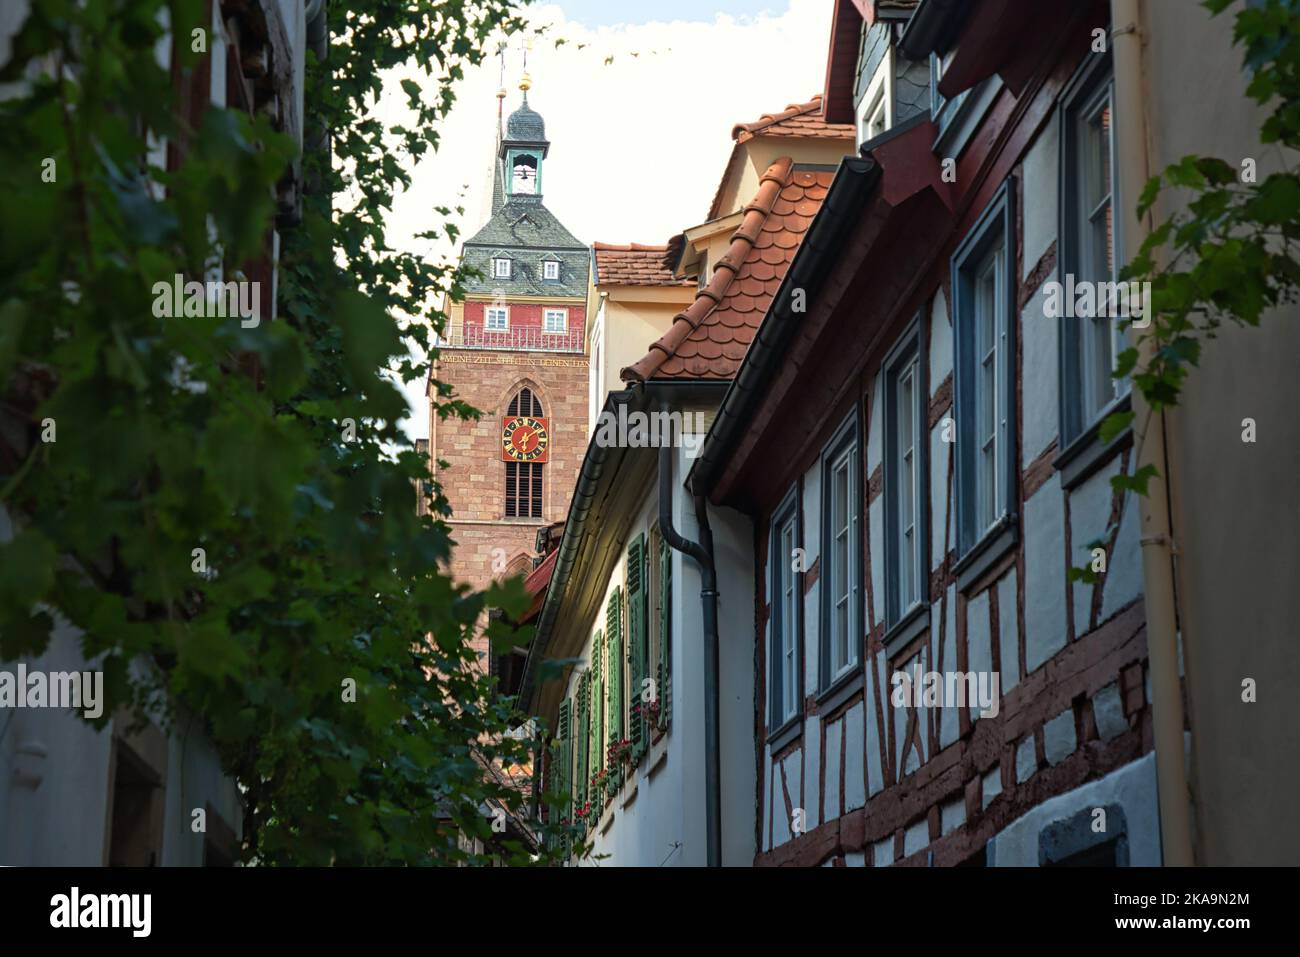 Neustadt an der Weinstrasse - The tower of the Stiftskirche St. Ägidius over half-timbered houses of the old town Stock Photo